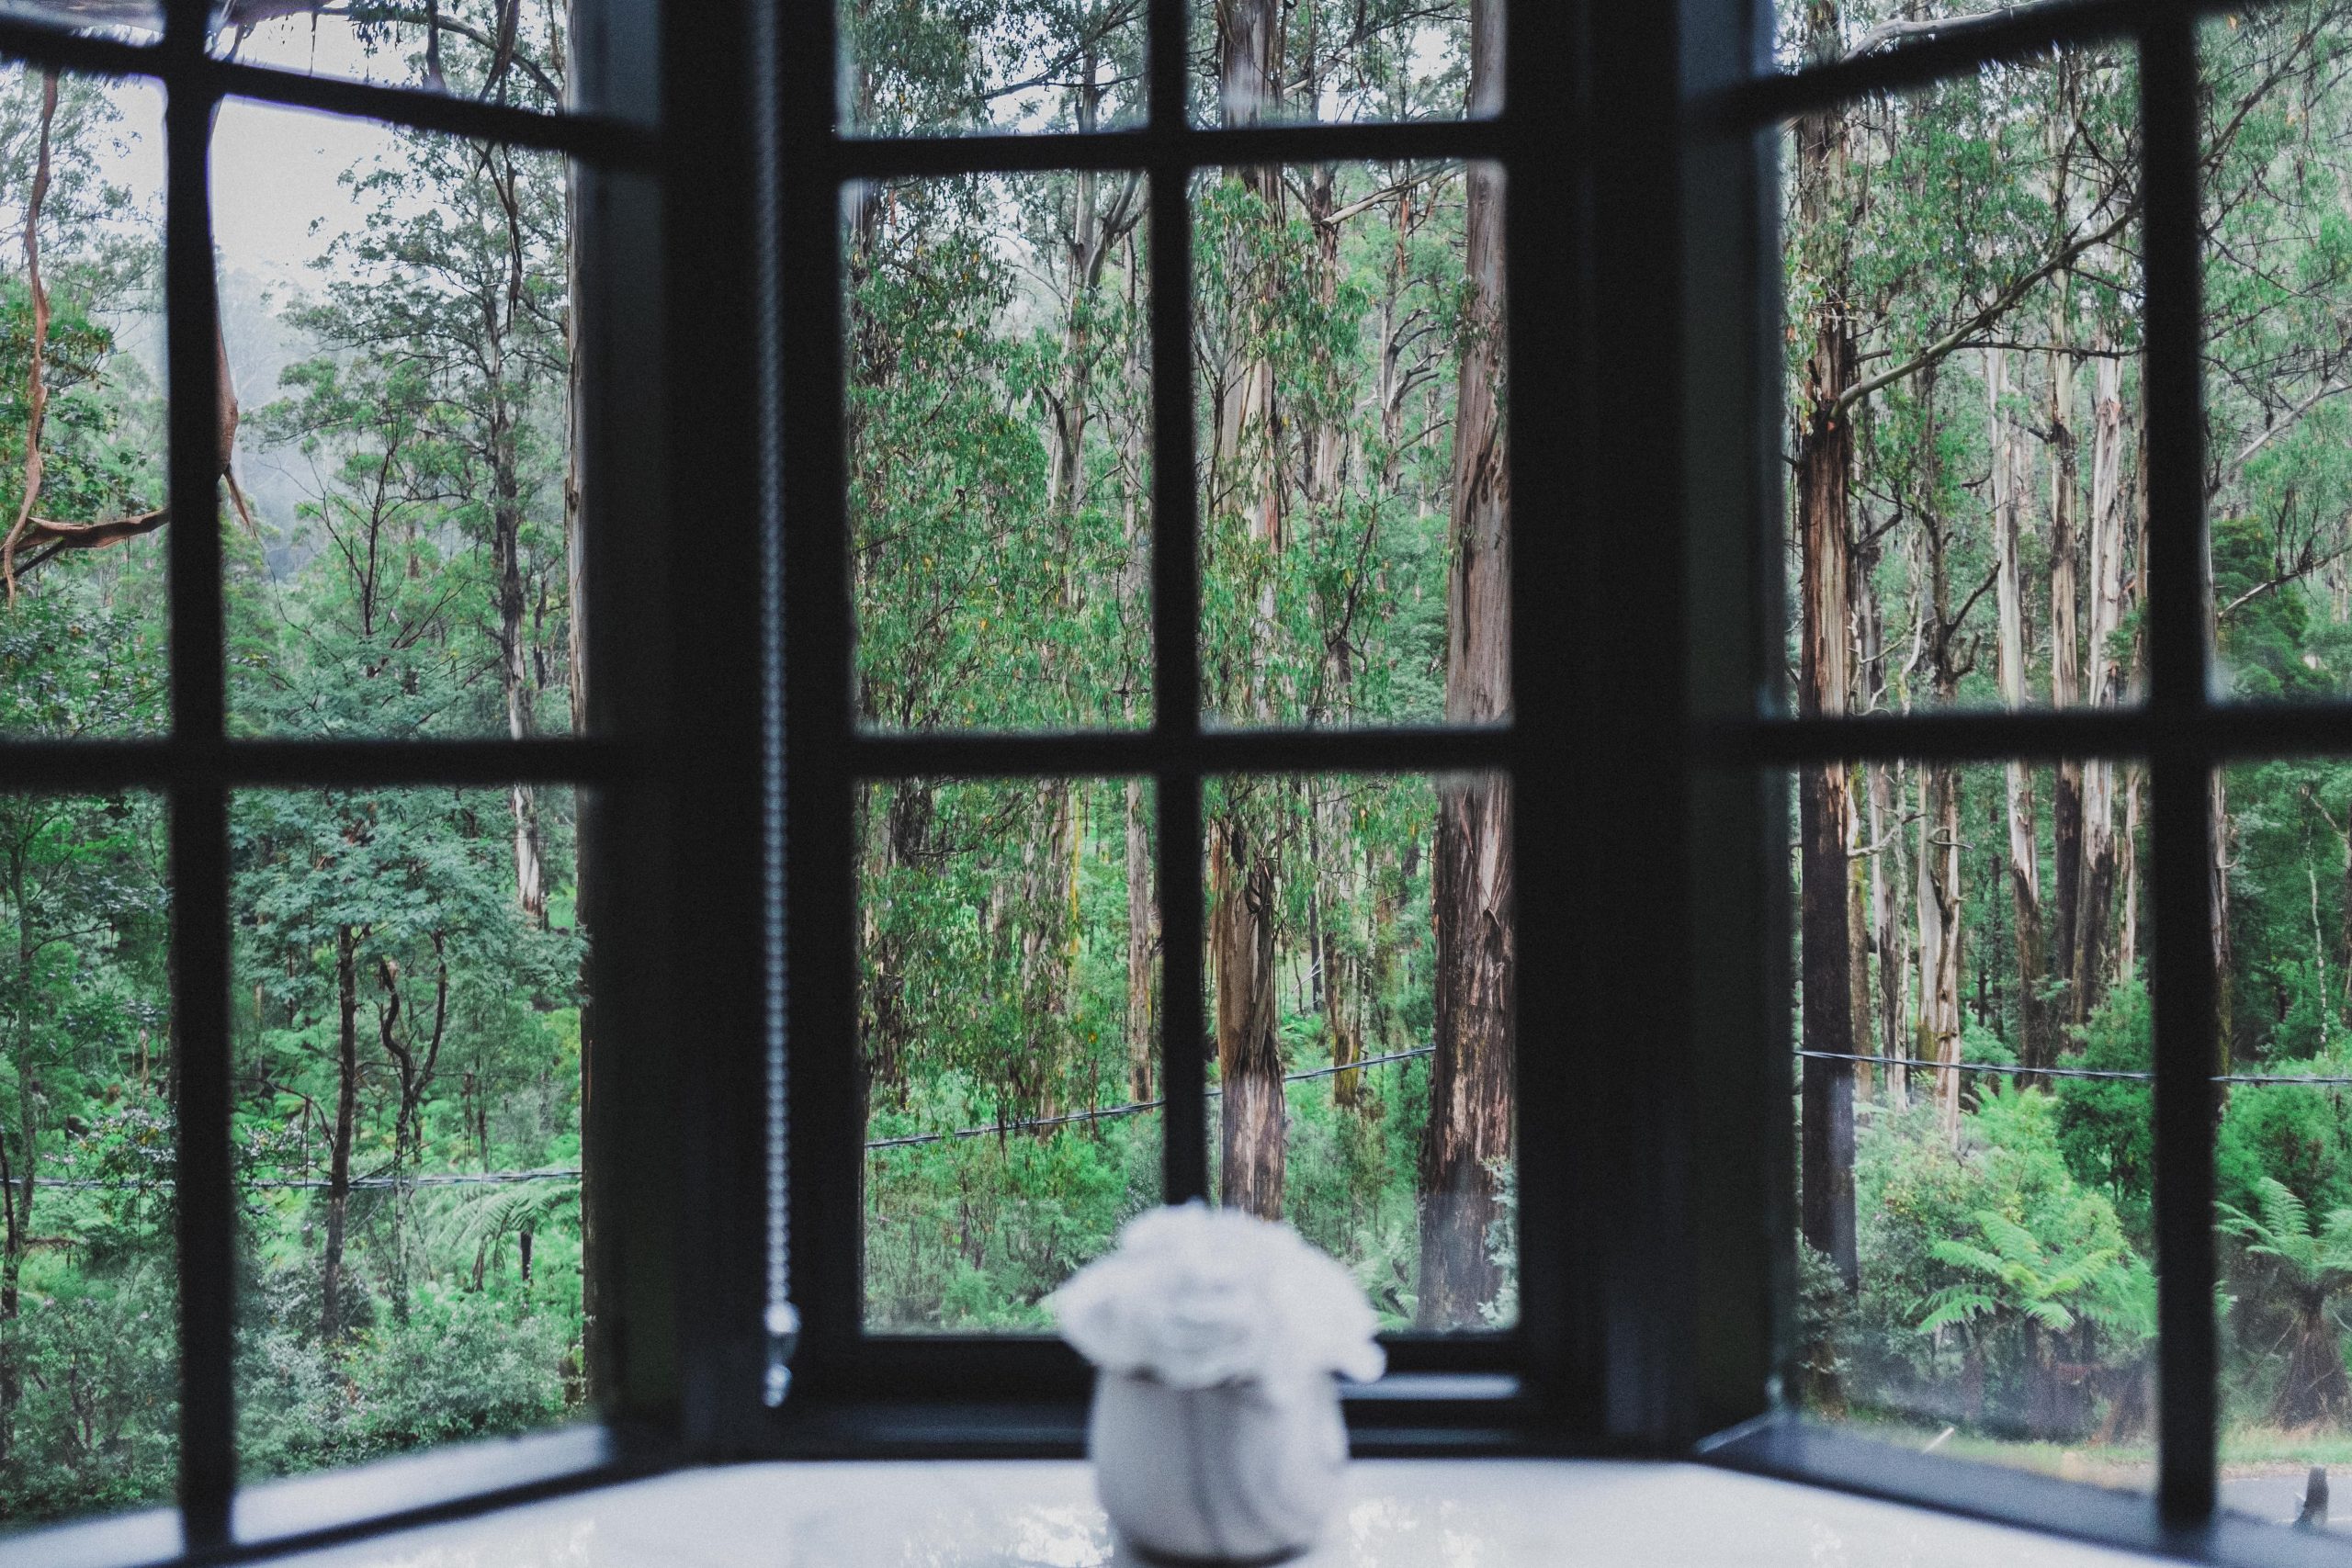 Glass windows looking into a forest | Featured Image for the Opioid Addiction Treatment Service Page on Hills & Ranges Melbourne.